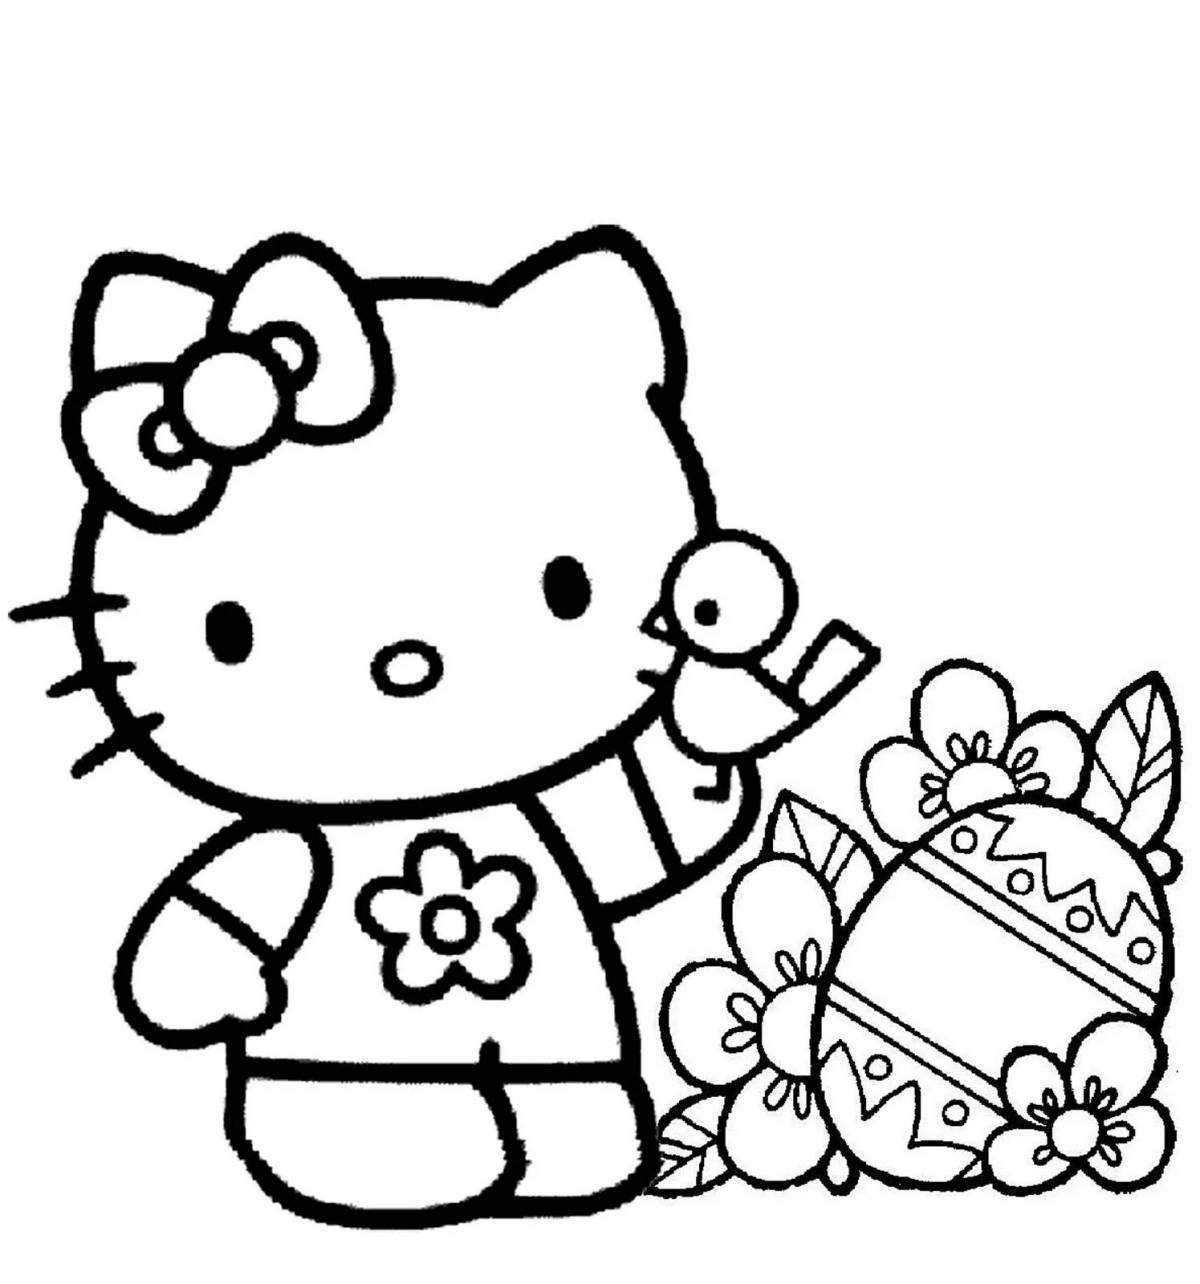 Coloring book glowing aster kitty